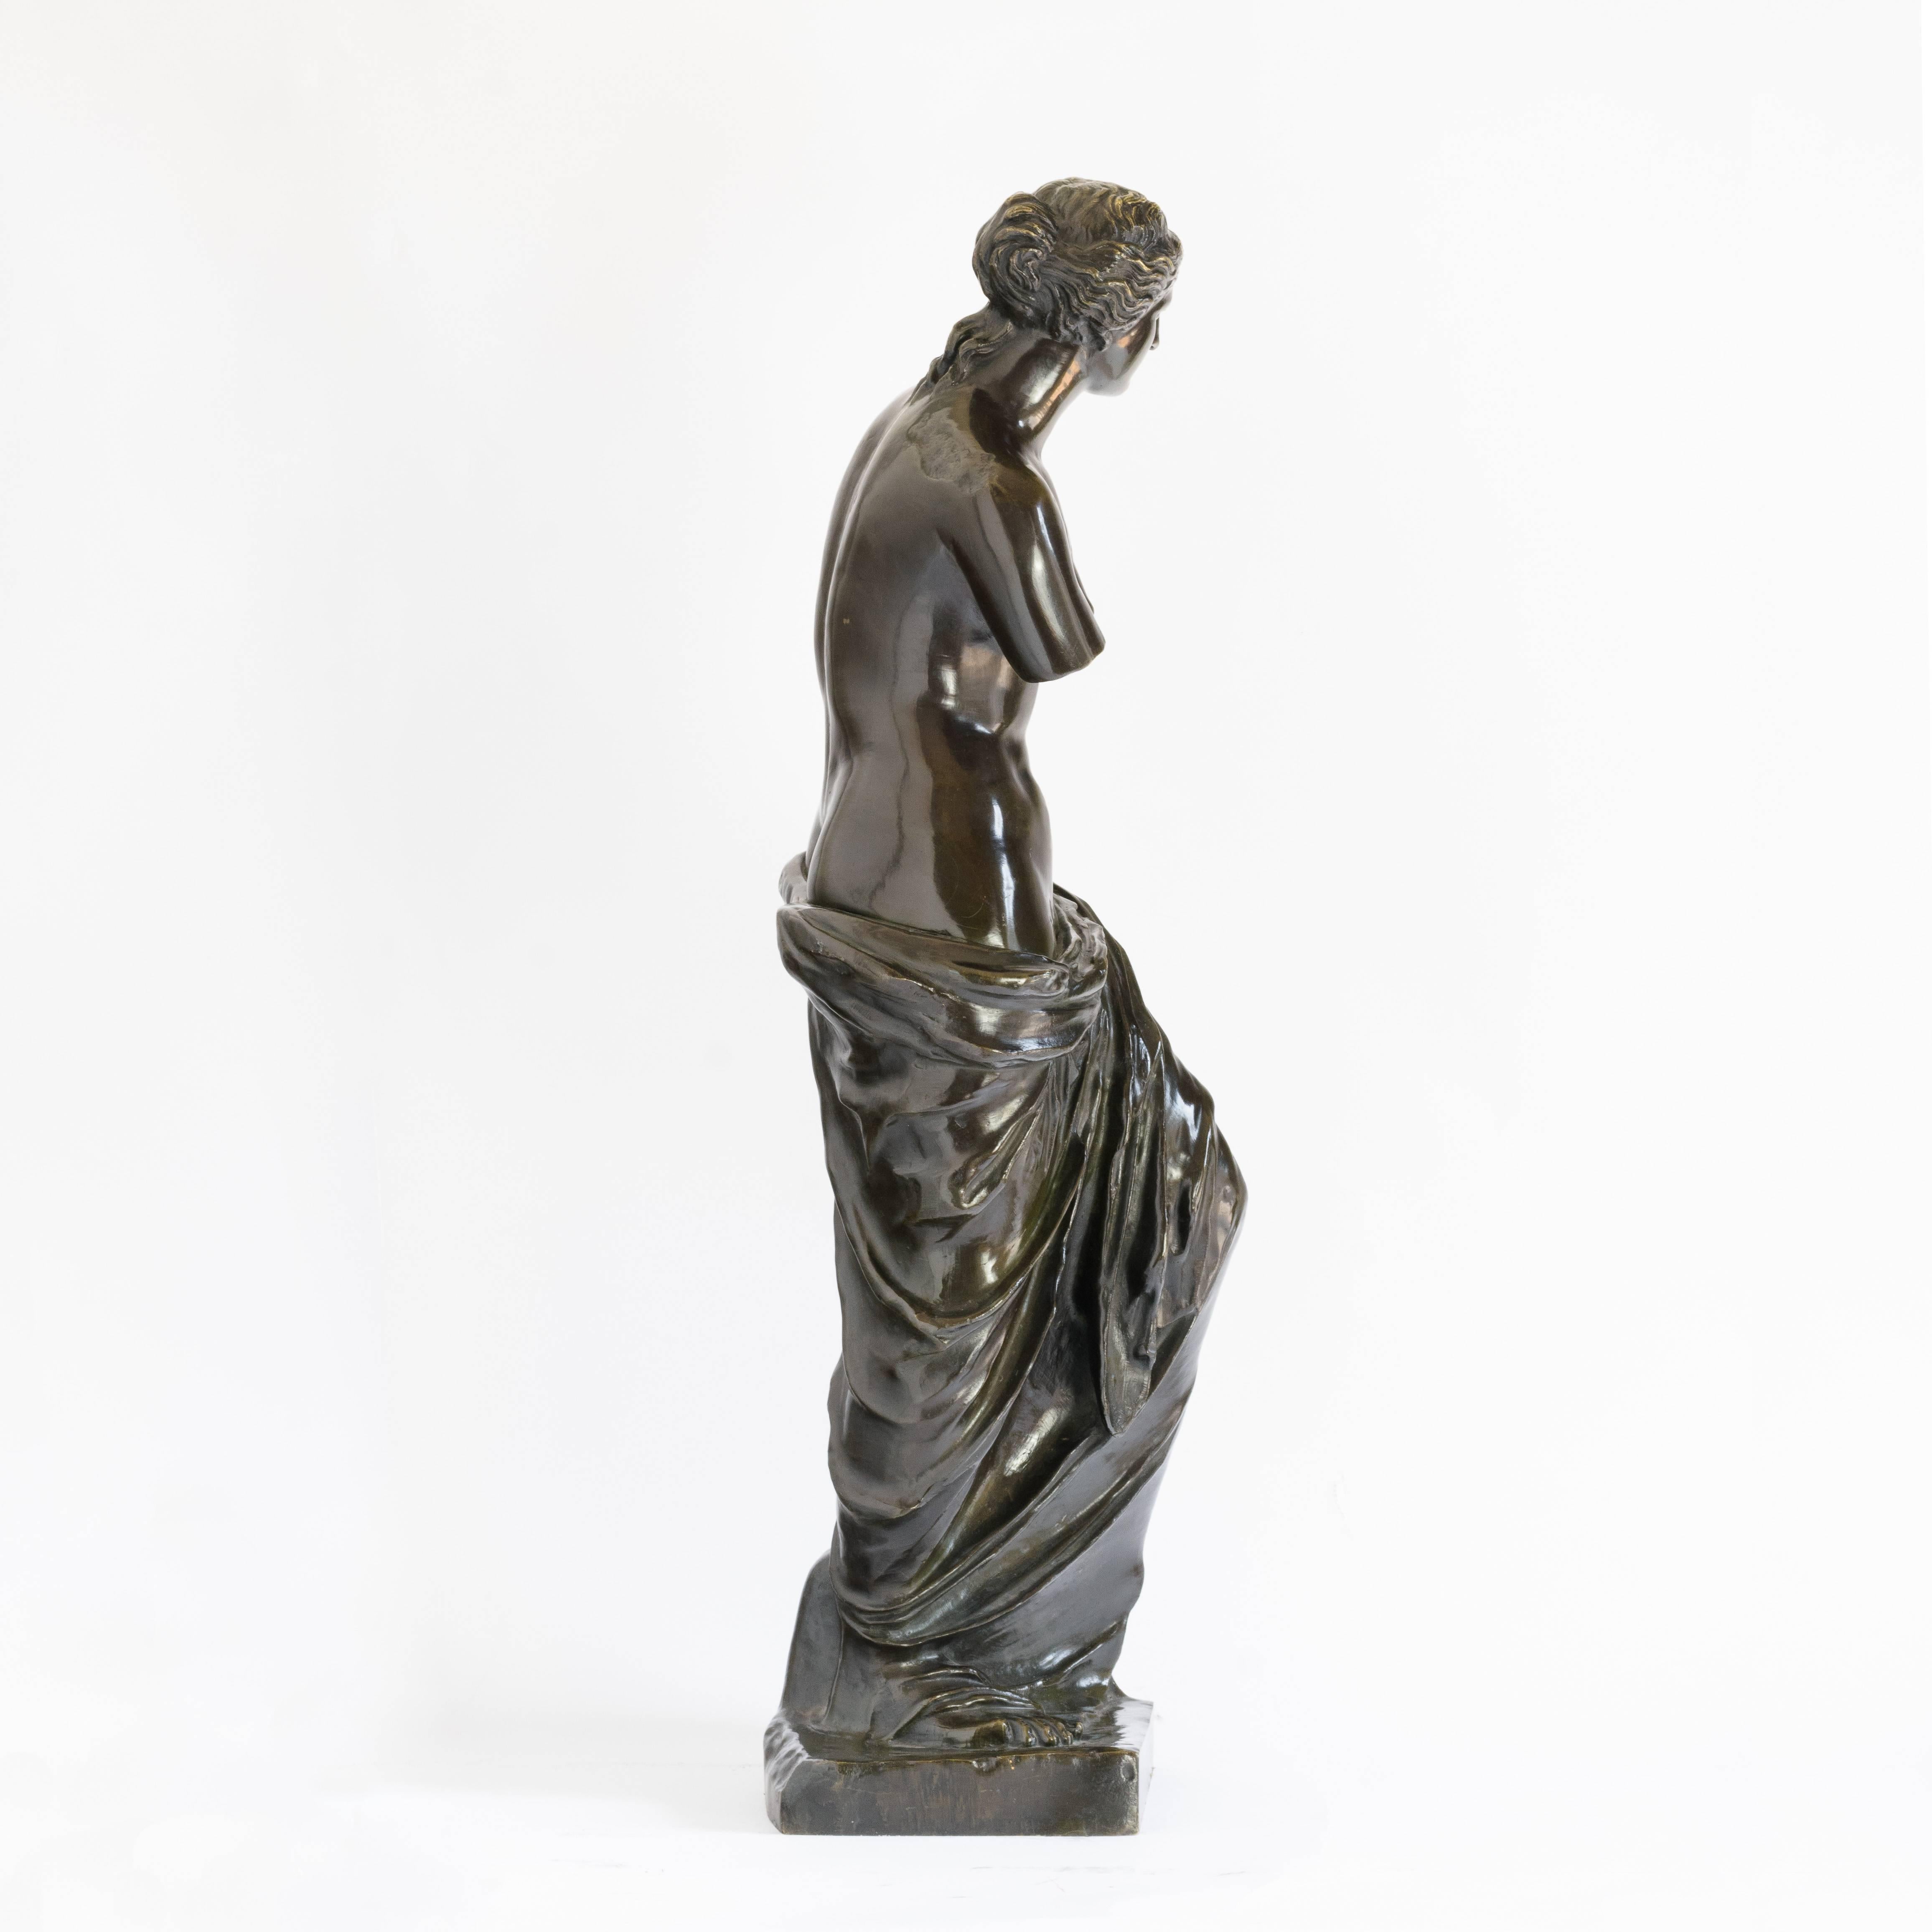 A bronze statue of Venus de Milo the Roman goddess of love, beauty, prosperity and fertility, after the antique, early 20th century.

Venus was of such high importance that the Romans claimed her as an ancestress and according to mythology, her son